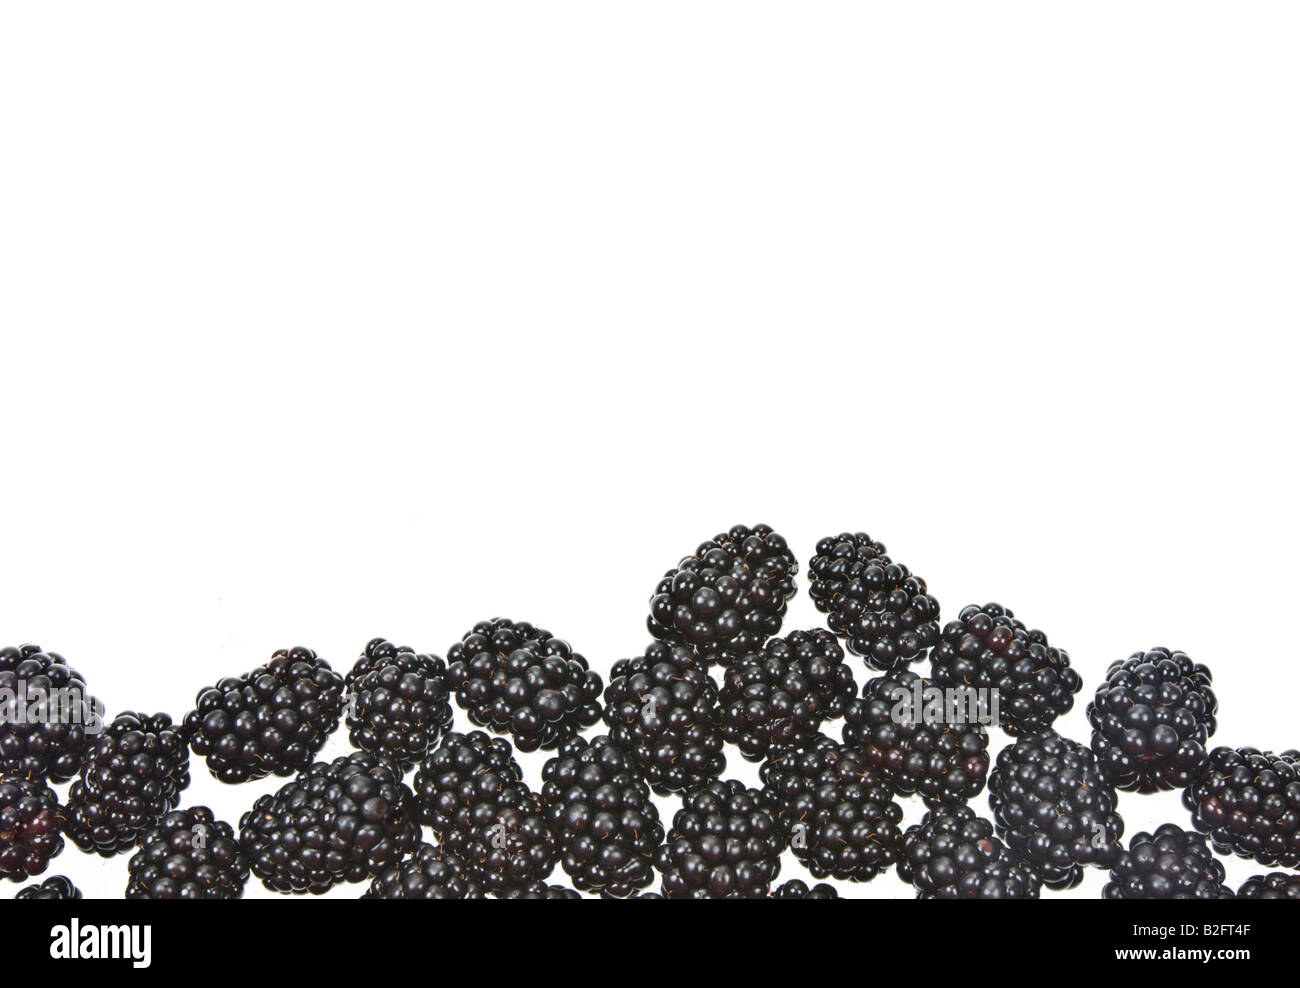 Rubas fruit Brombeere blackberry dewberry black berries boysenberry marionberry punnet panicle fresh on white Background space f Stock Photo